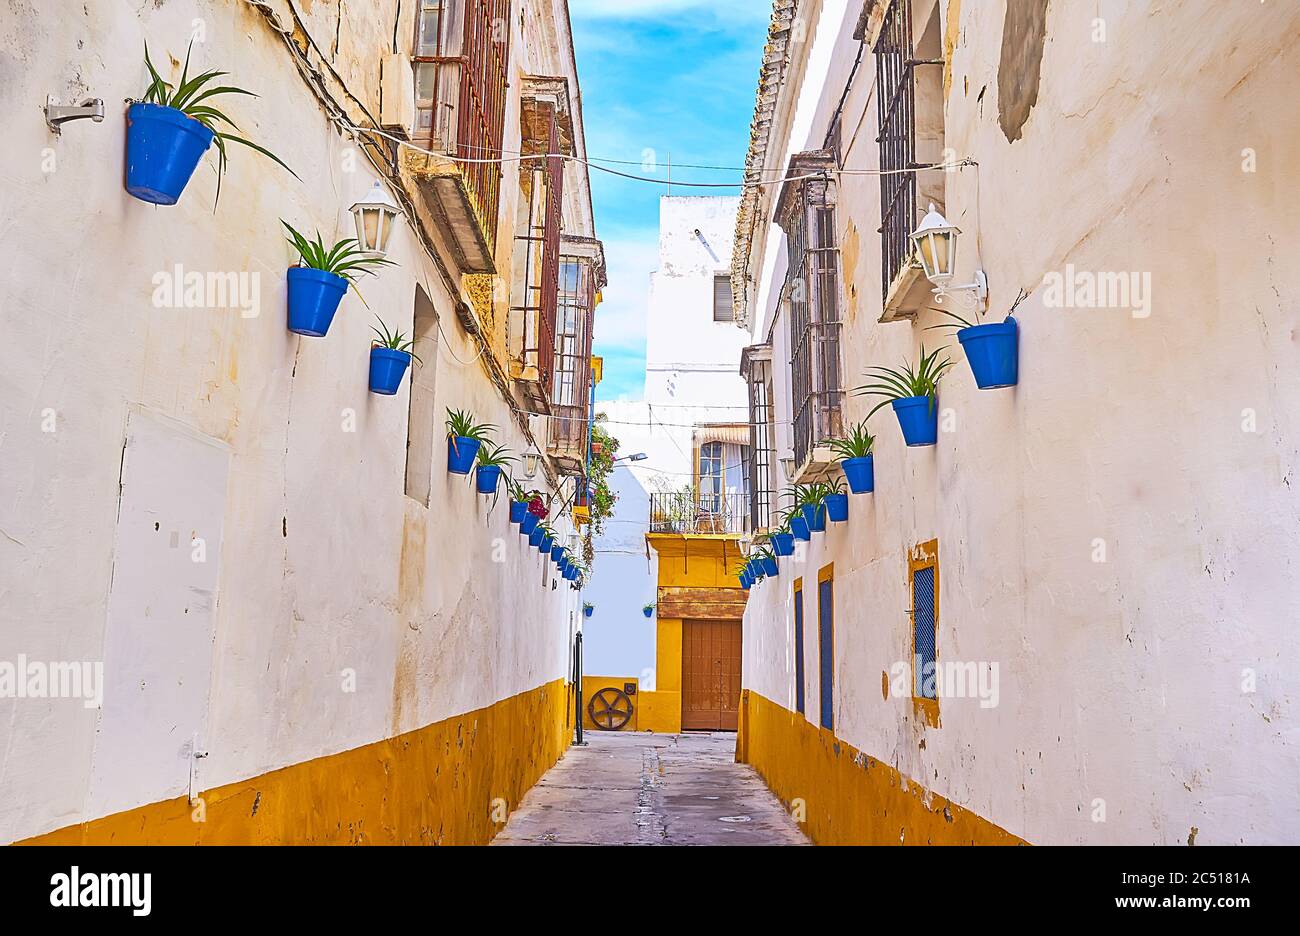 The narrow backstreet in old town, decorated with plants in blue pots, hanging on the houses walls, Sanlucar, Spain Stock Photo